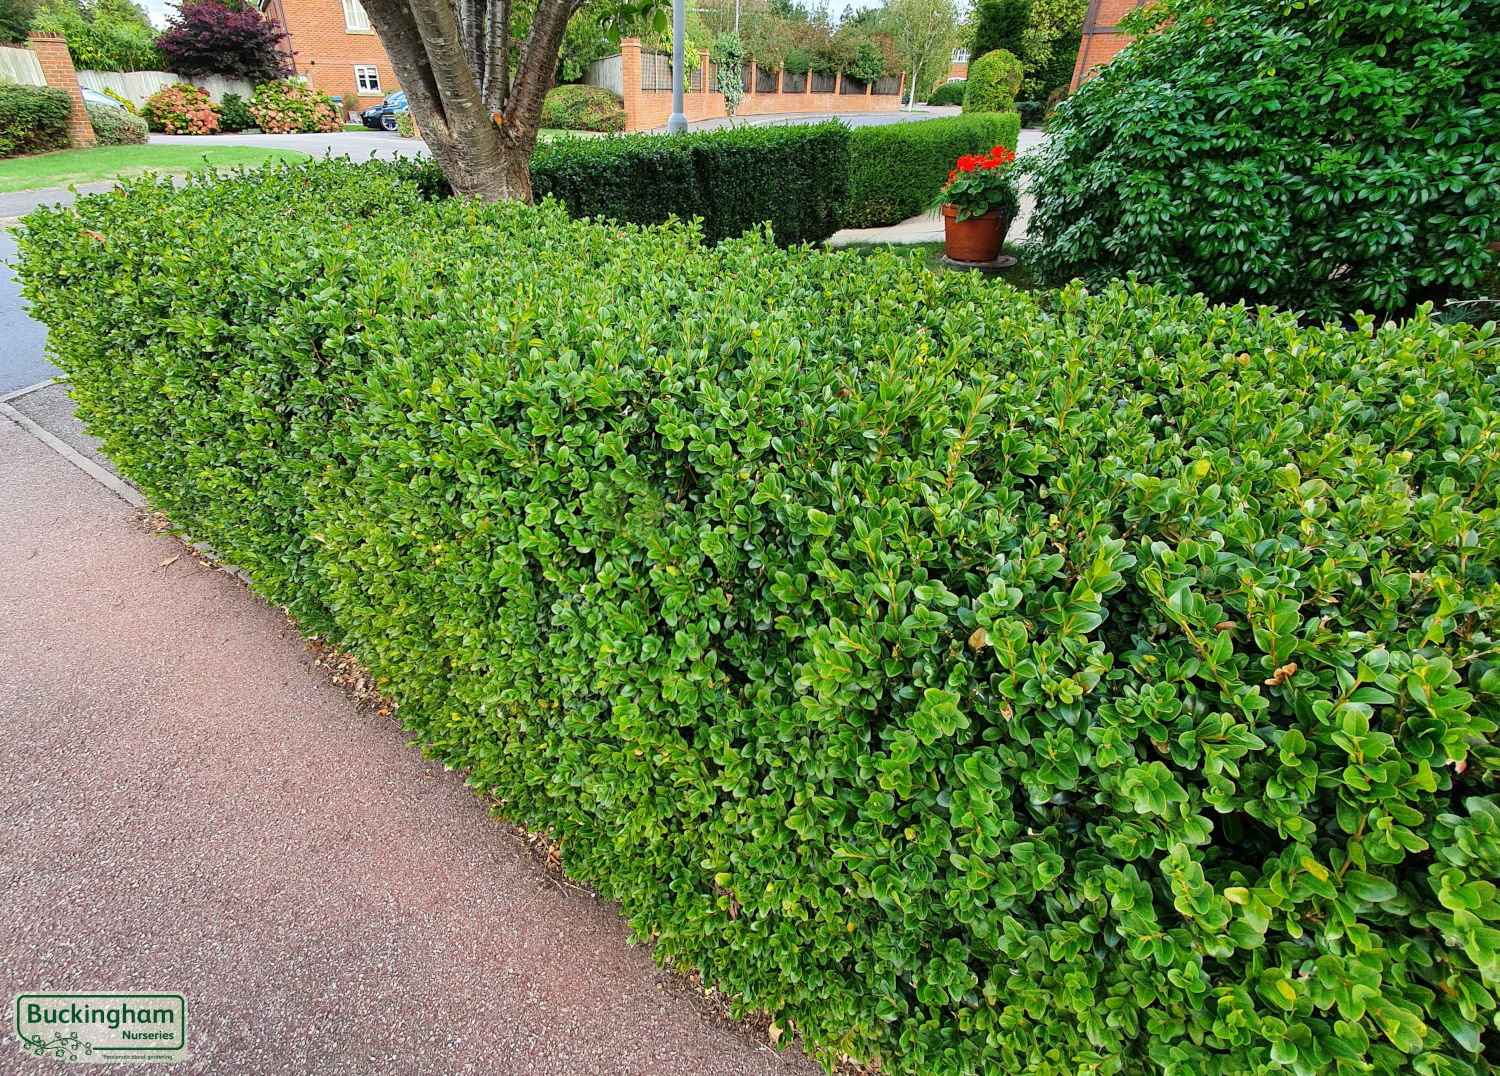 Mature Common Box hedge which has been allowed to grow to over 2m/7ft.